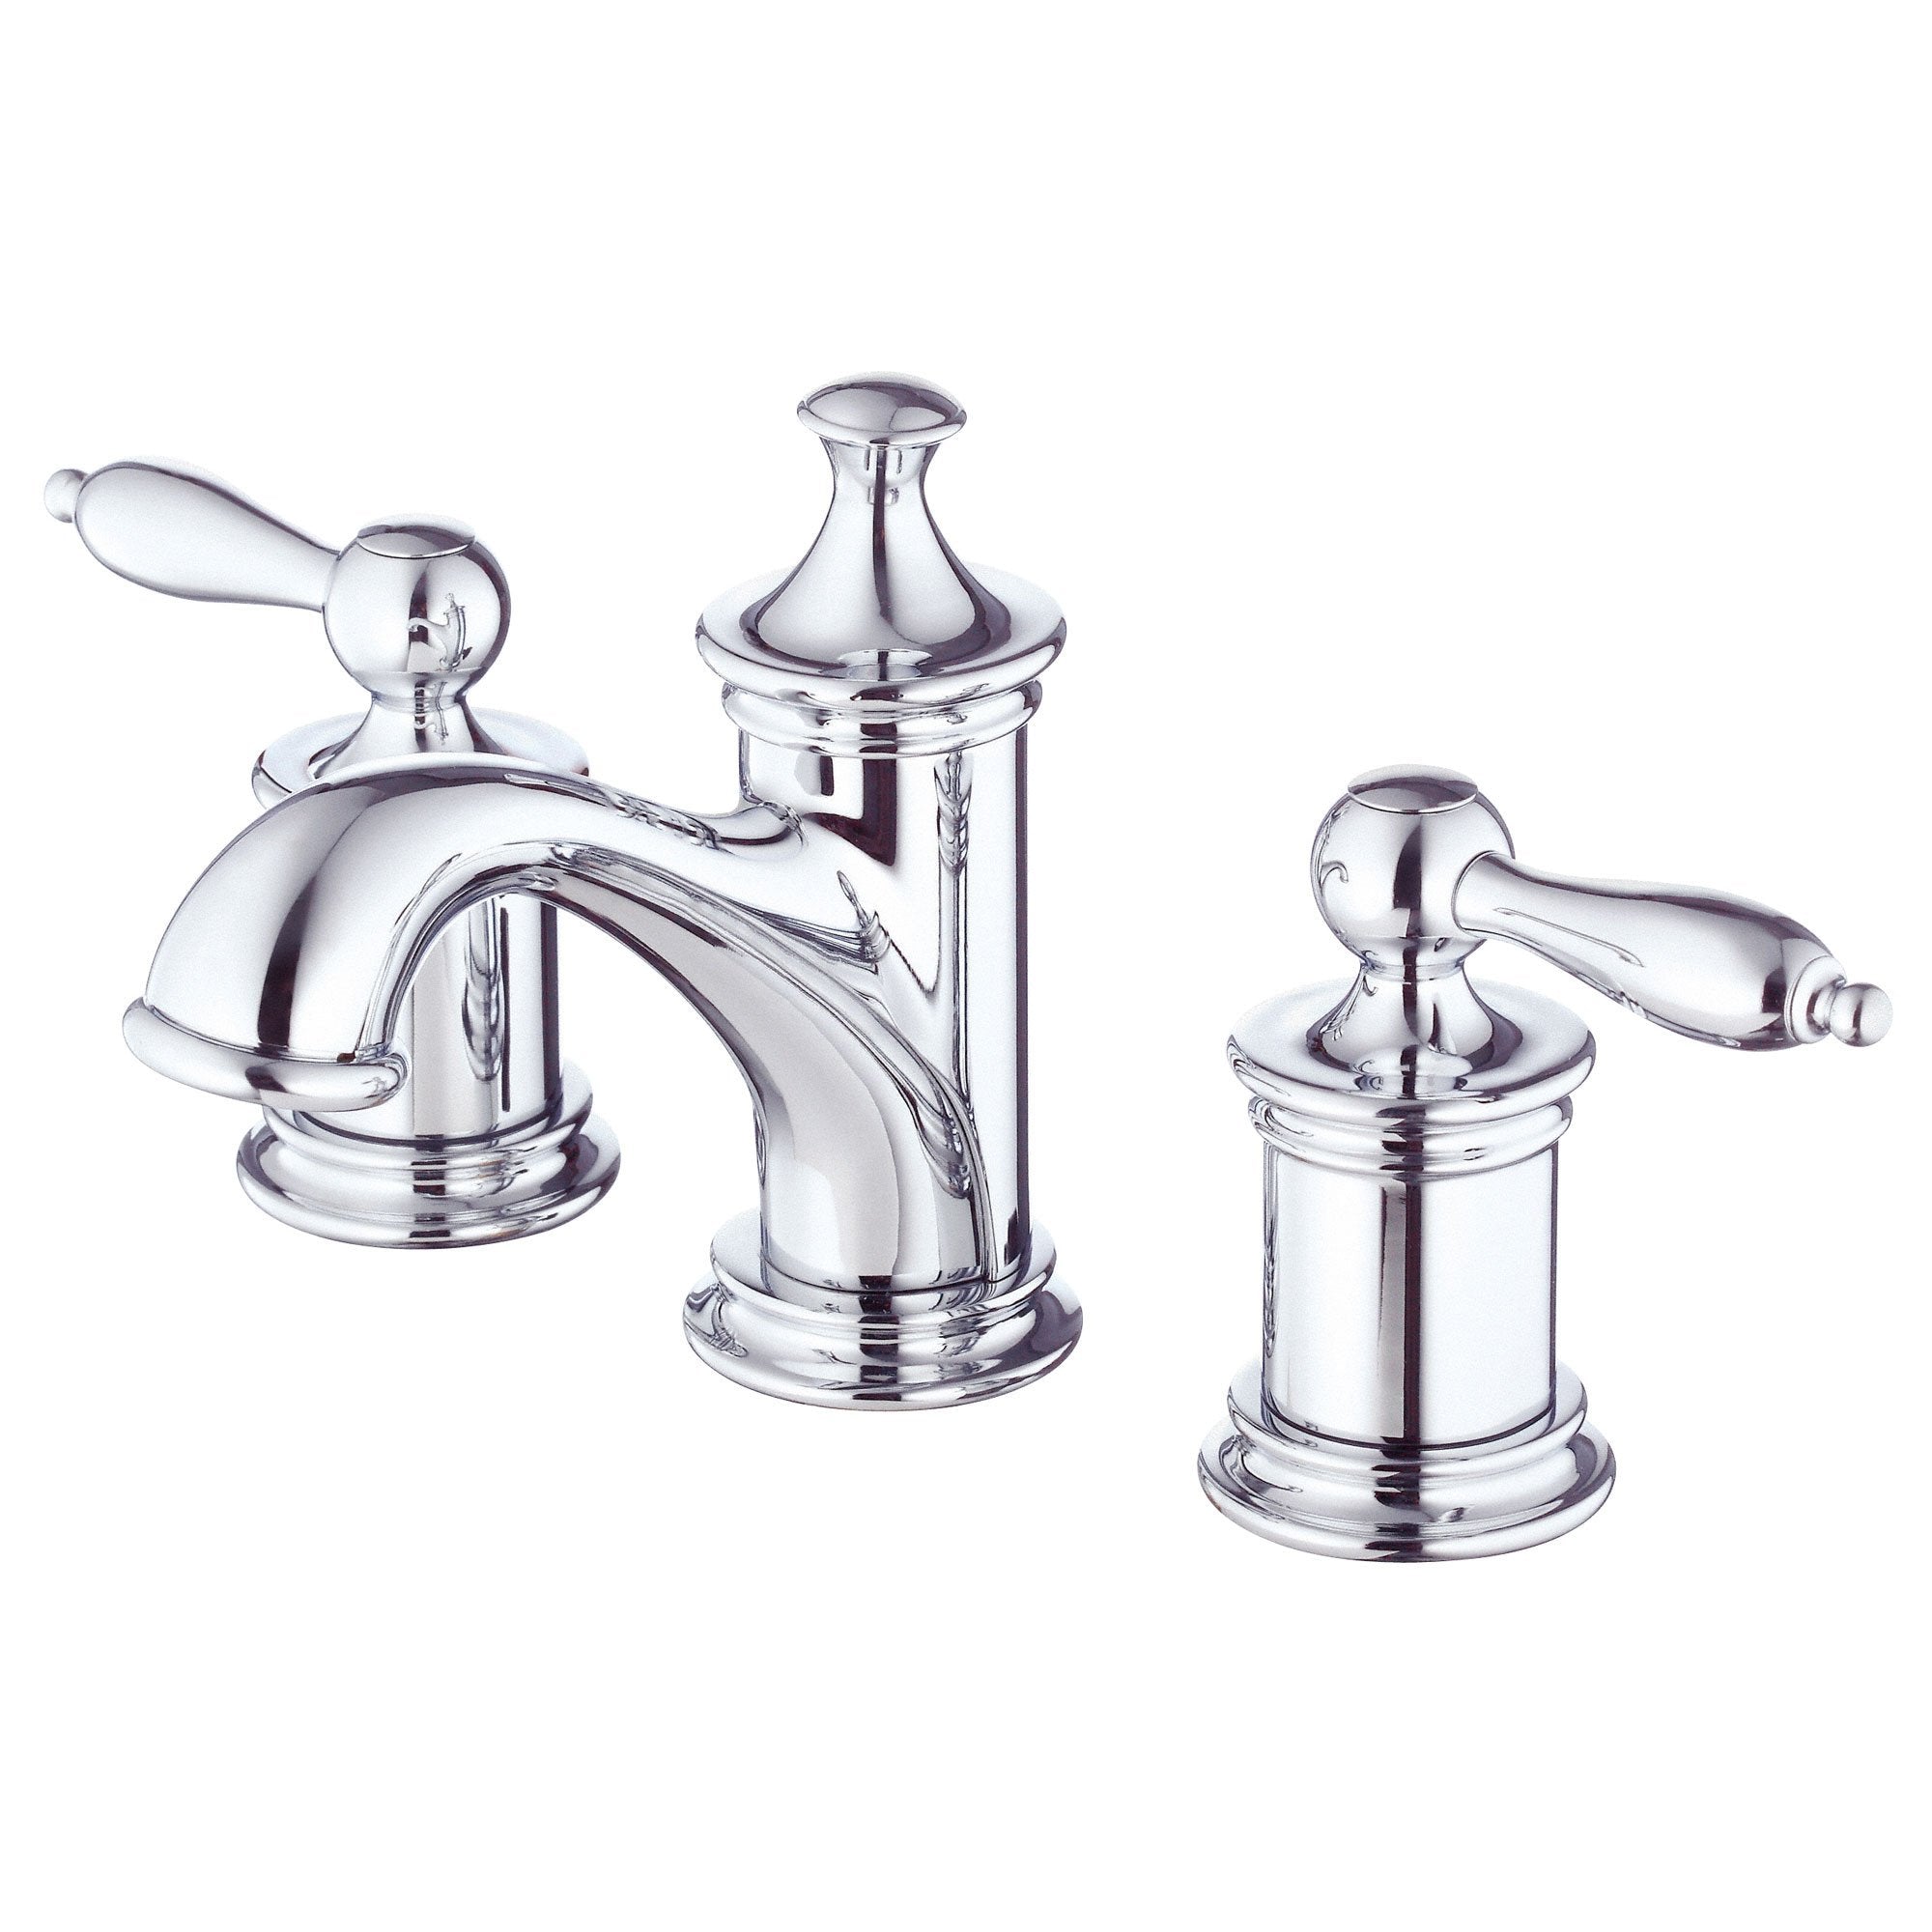 Danze Prince Chrome Widespread Bathroom Sink Faucet With Touch